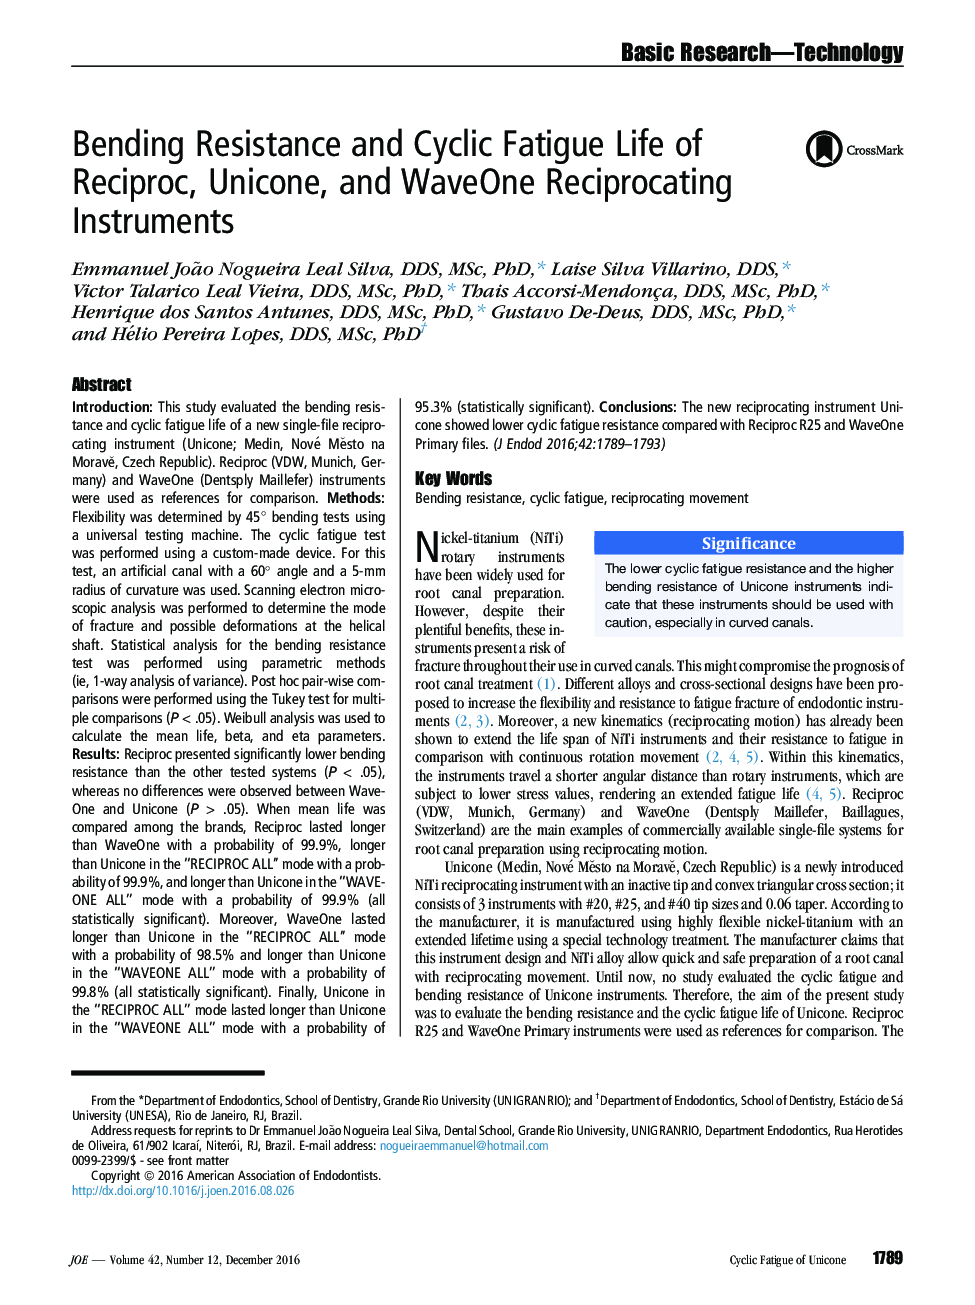 Bending Resistance and Cyclic Fatigue Life of Reciproc, Unicone, and WaveOne Reciprocating Instruments